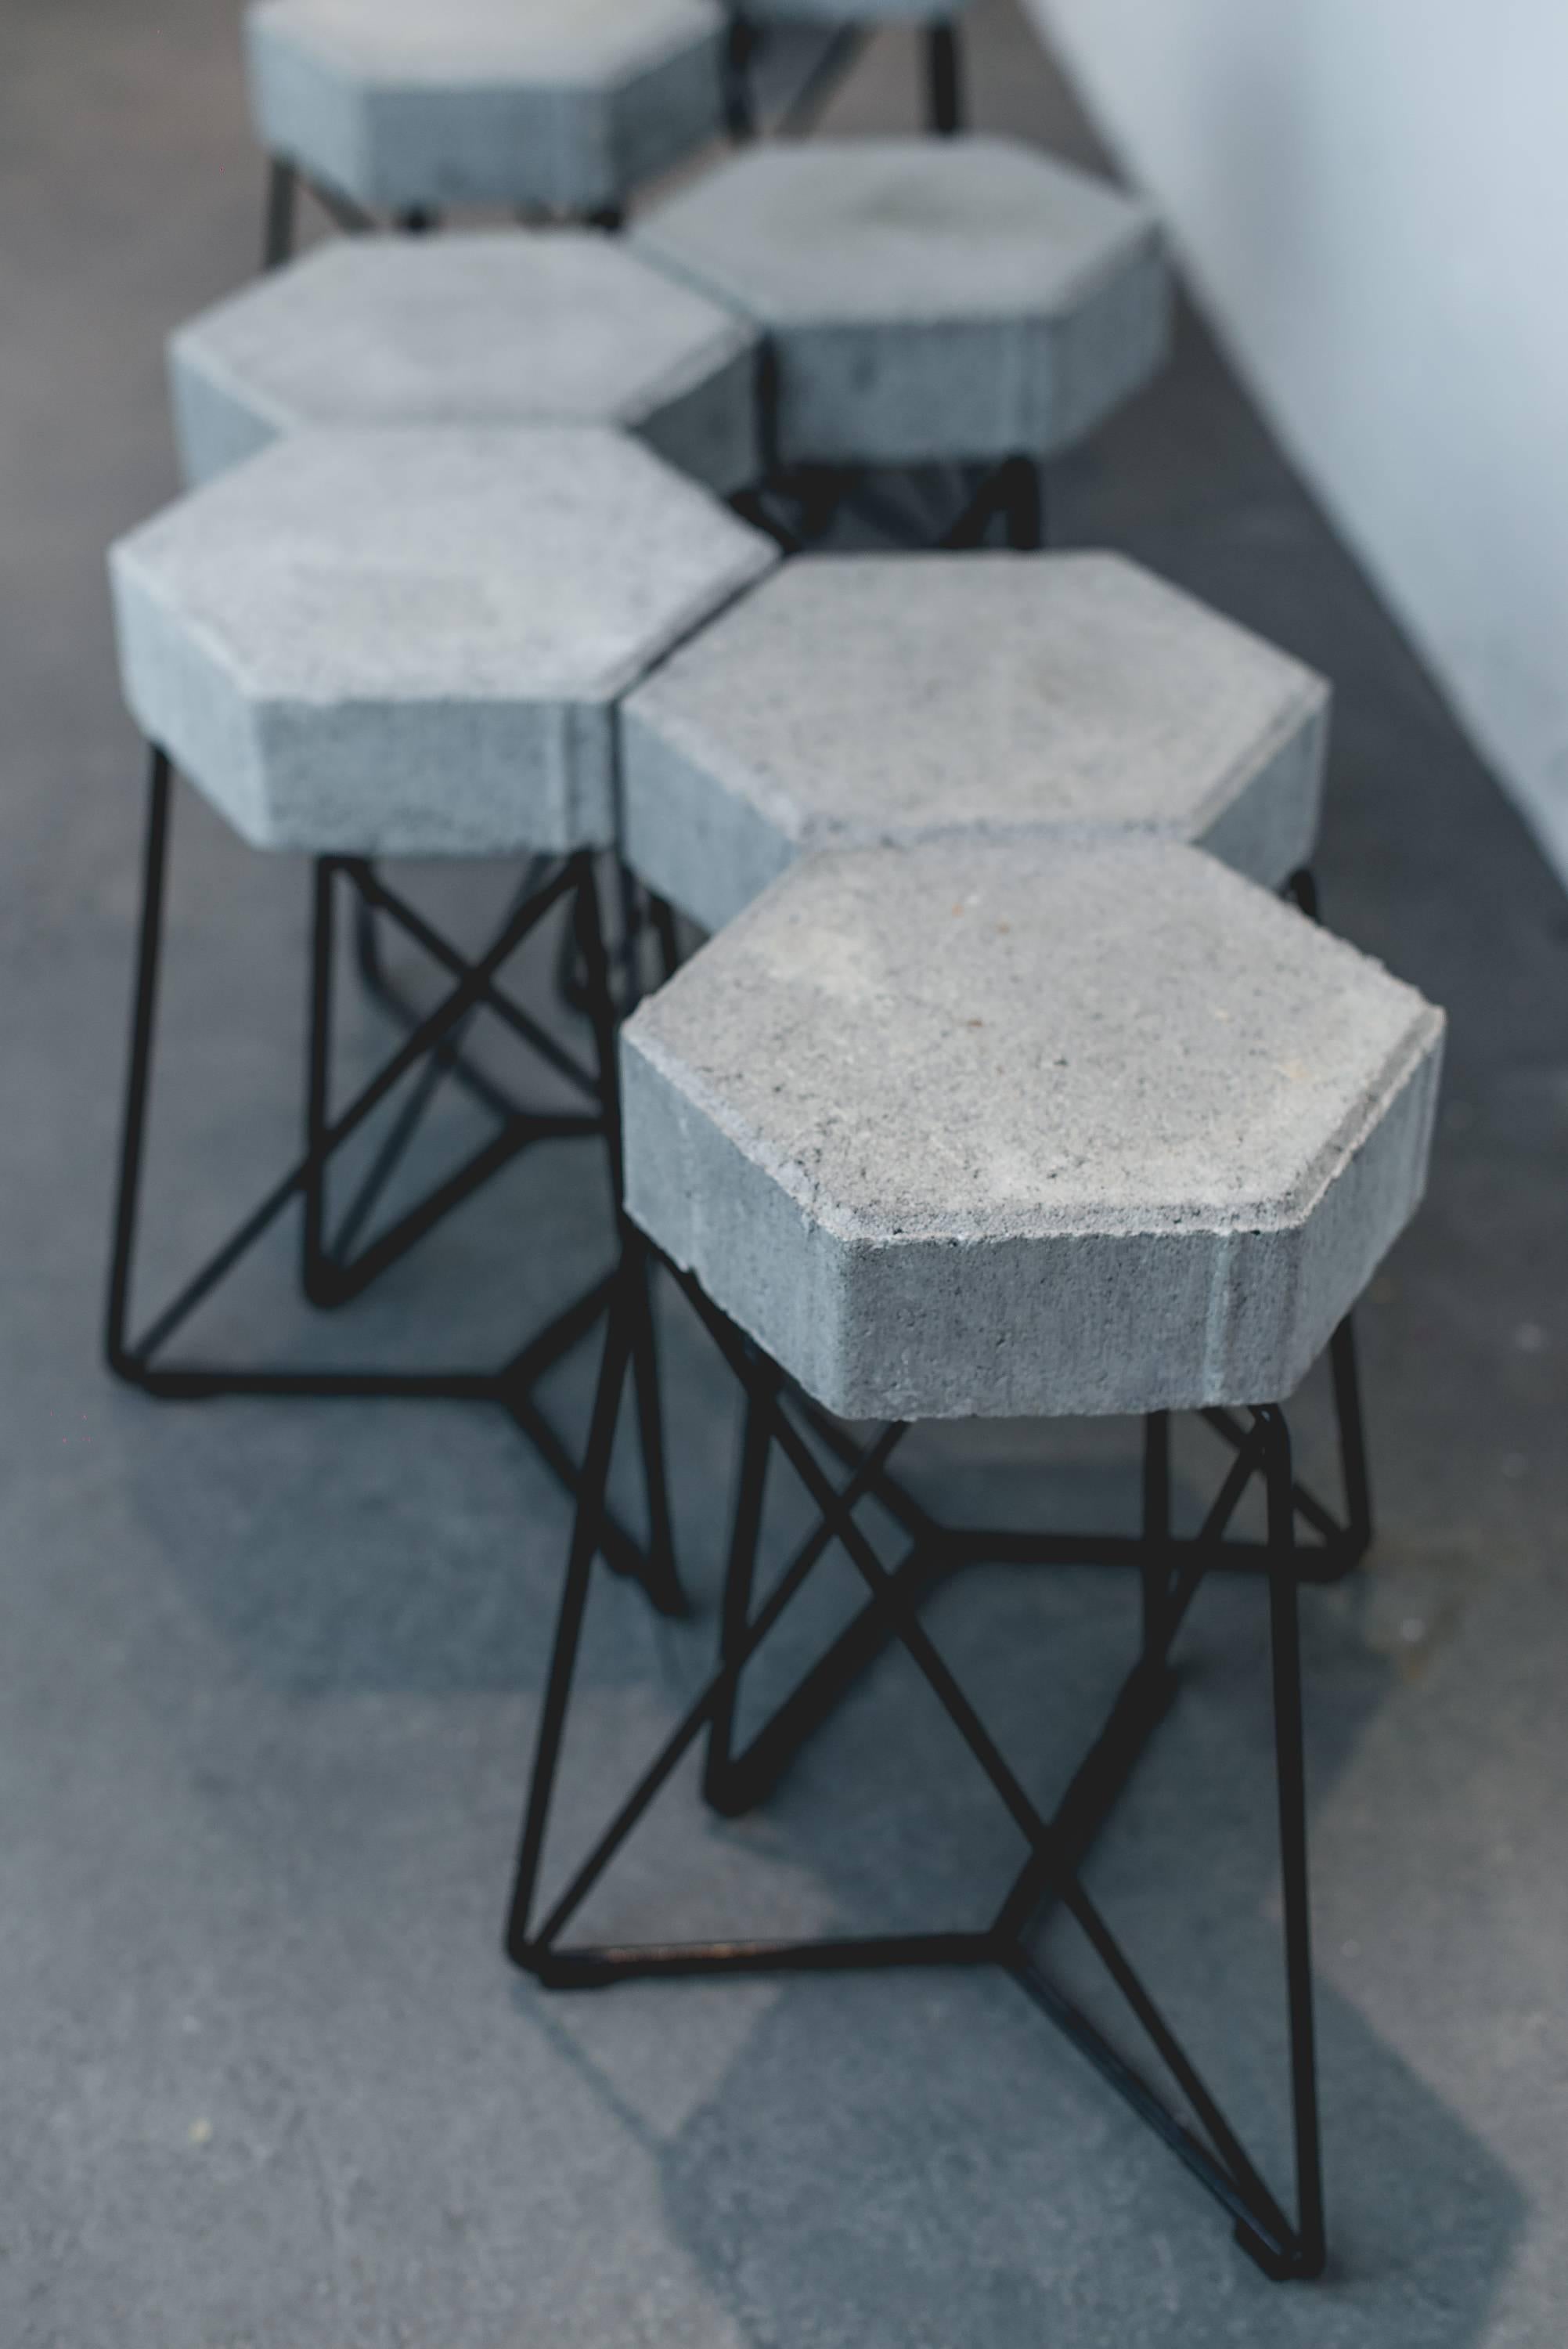 The URBE stool is an use adaptation from an imaginary urban element, where the seat creates a relation between its weight and lightness with the structure. The seat is a concrete block and its structure is made of solid iron finished in black